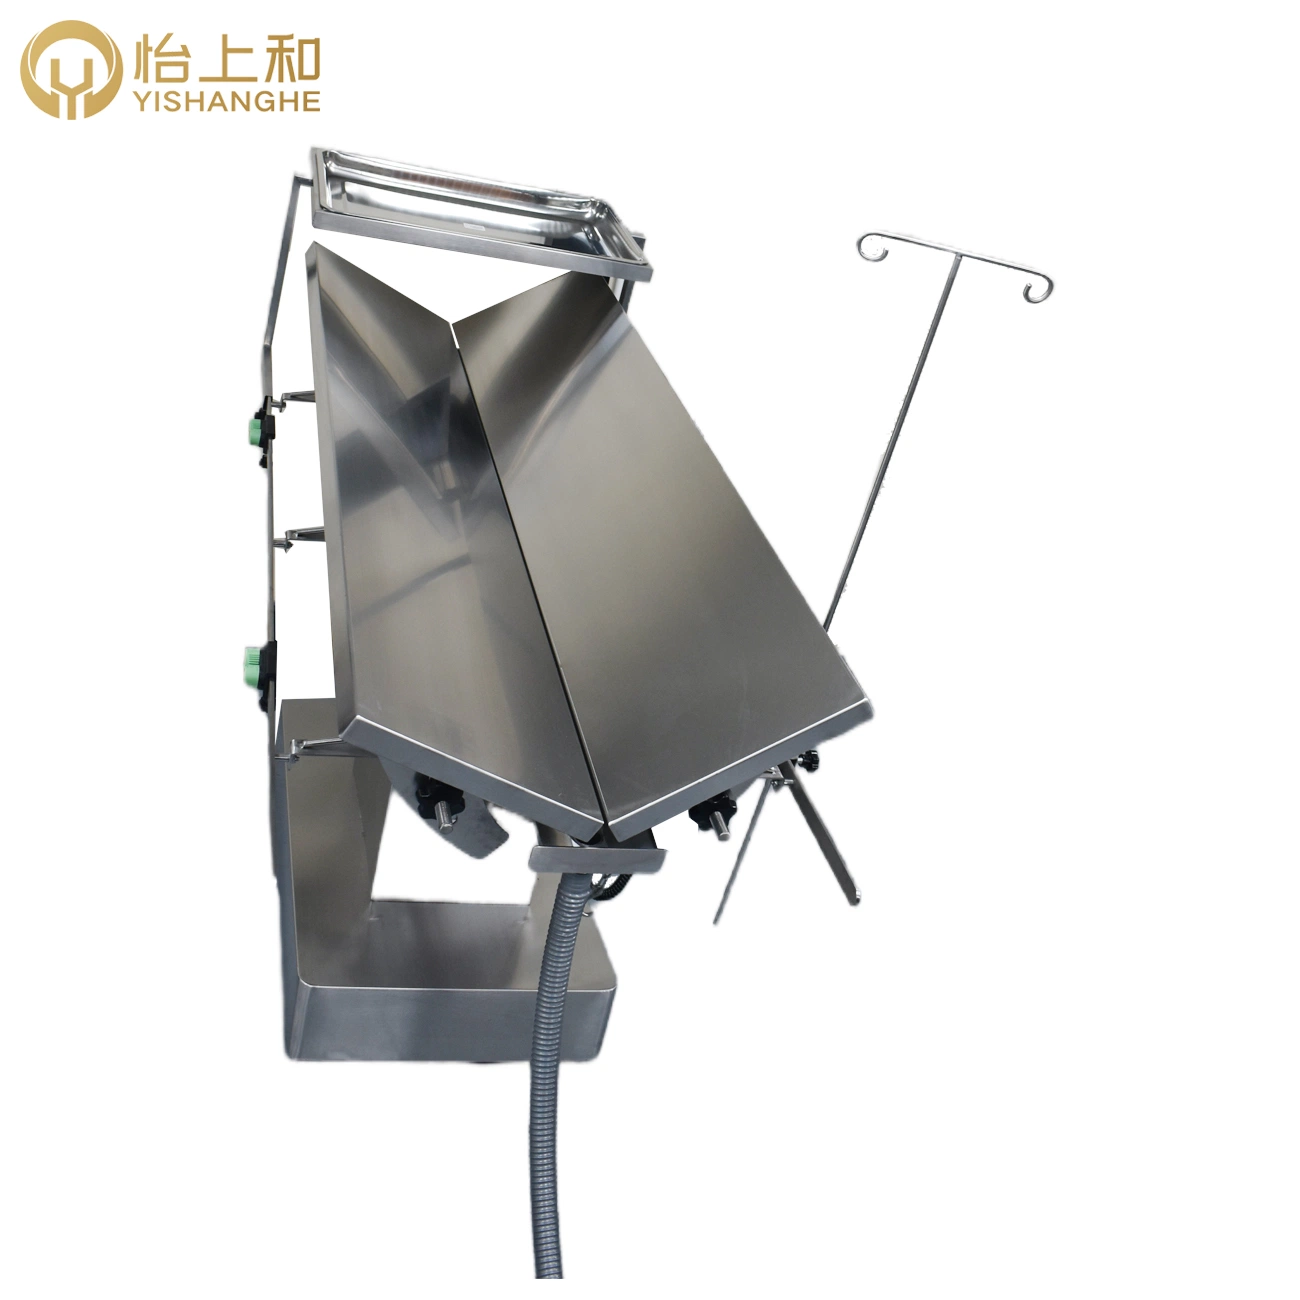 Pet Medical Veterinary Table Surgical Examination Treatment Constant Temperature Electric